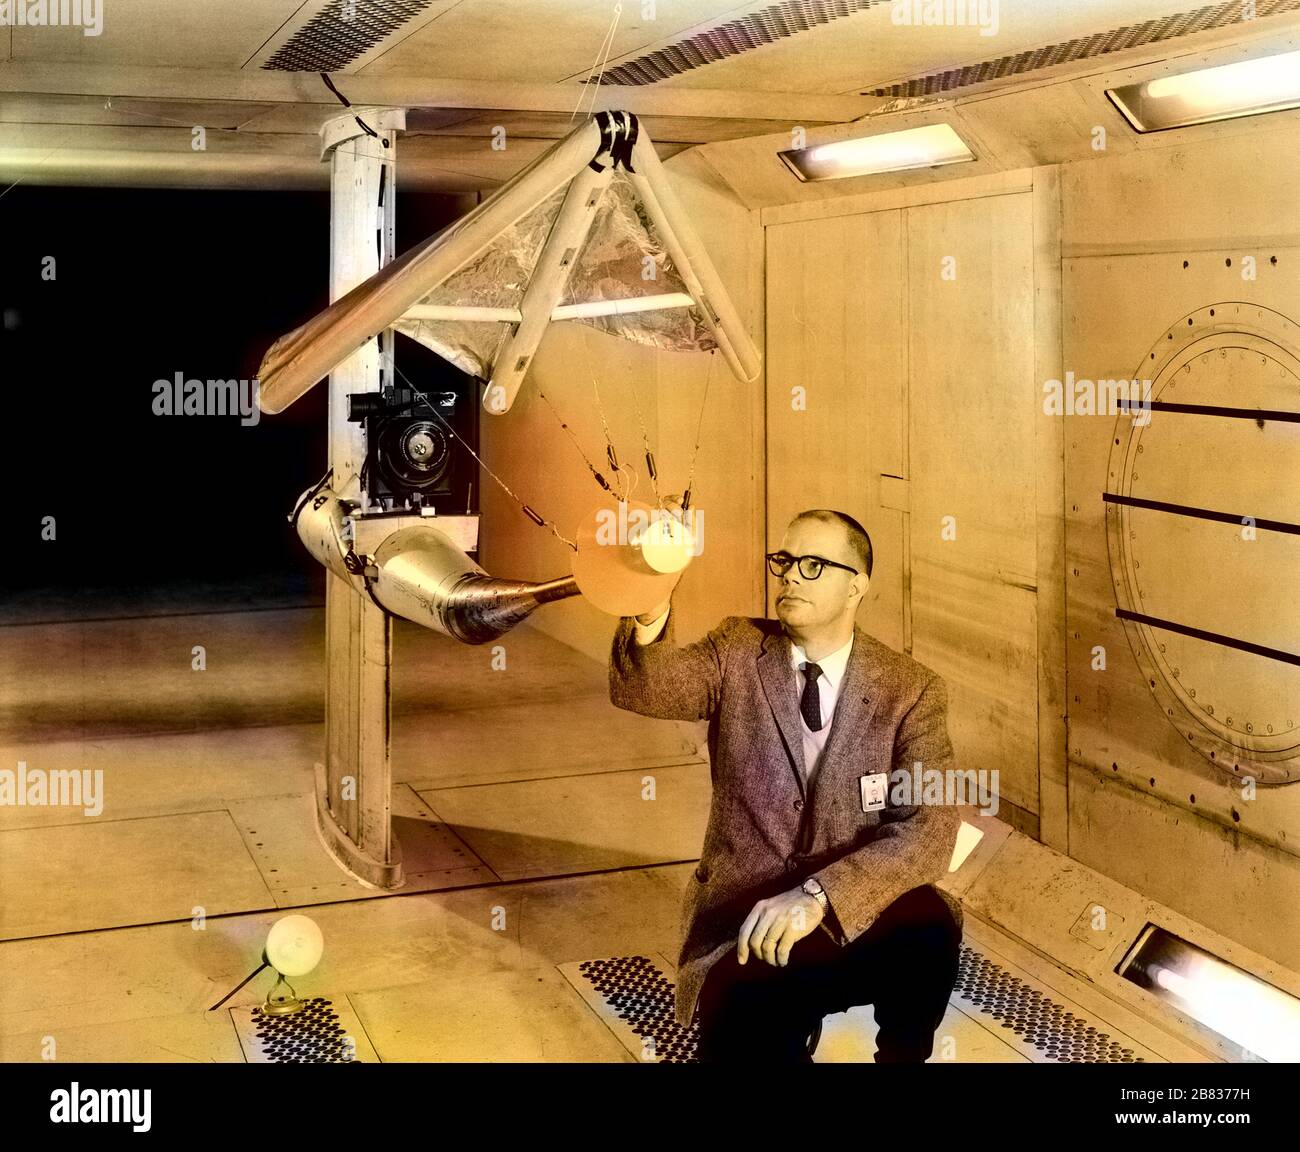 WC Sleeman, Jr inspecting a model of the 'Rogallo Wing' paraglider in wind tunnel at Langley Research Center, Hampton, Virginia, February 5, 1962. Image courtesy National Aeronautics and Space Administration (NASA). Note: Image has been digitally colorized using a modern process. Colors may not be period-accurate. () Stock Photo